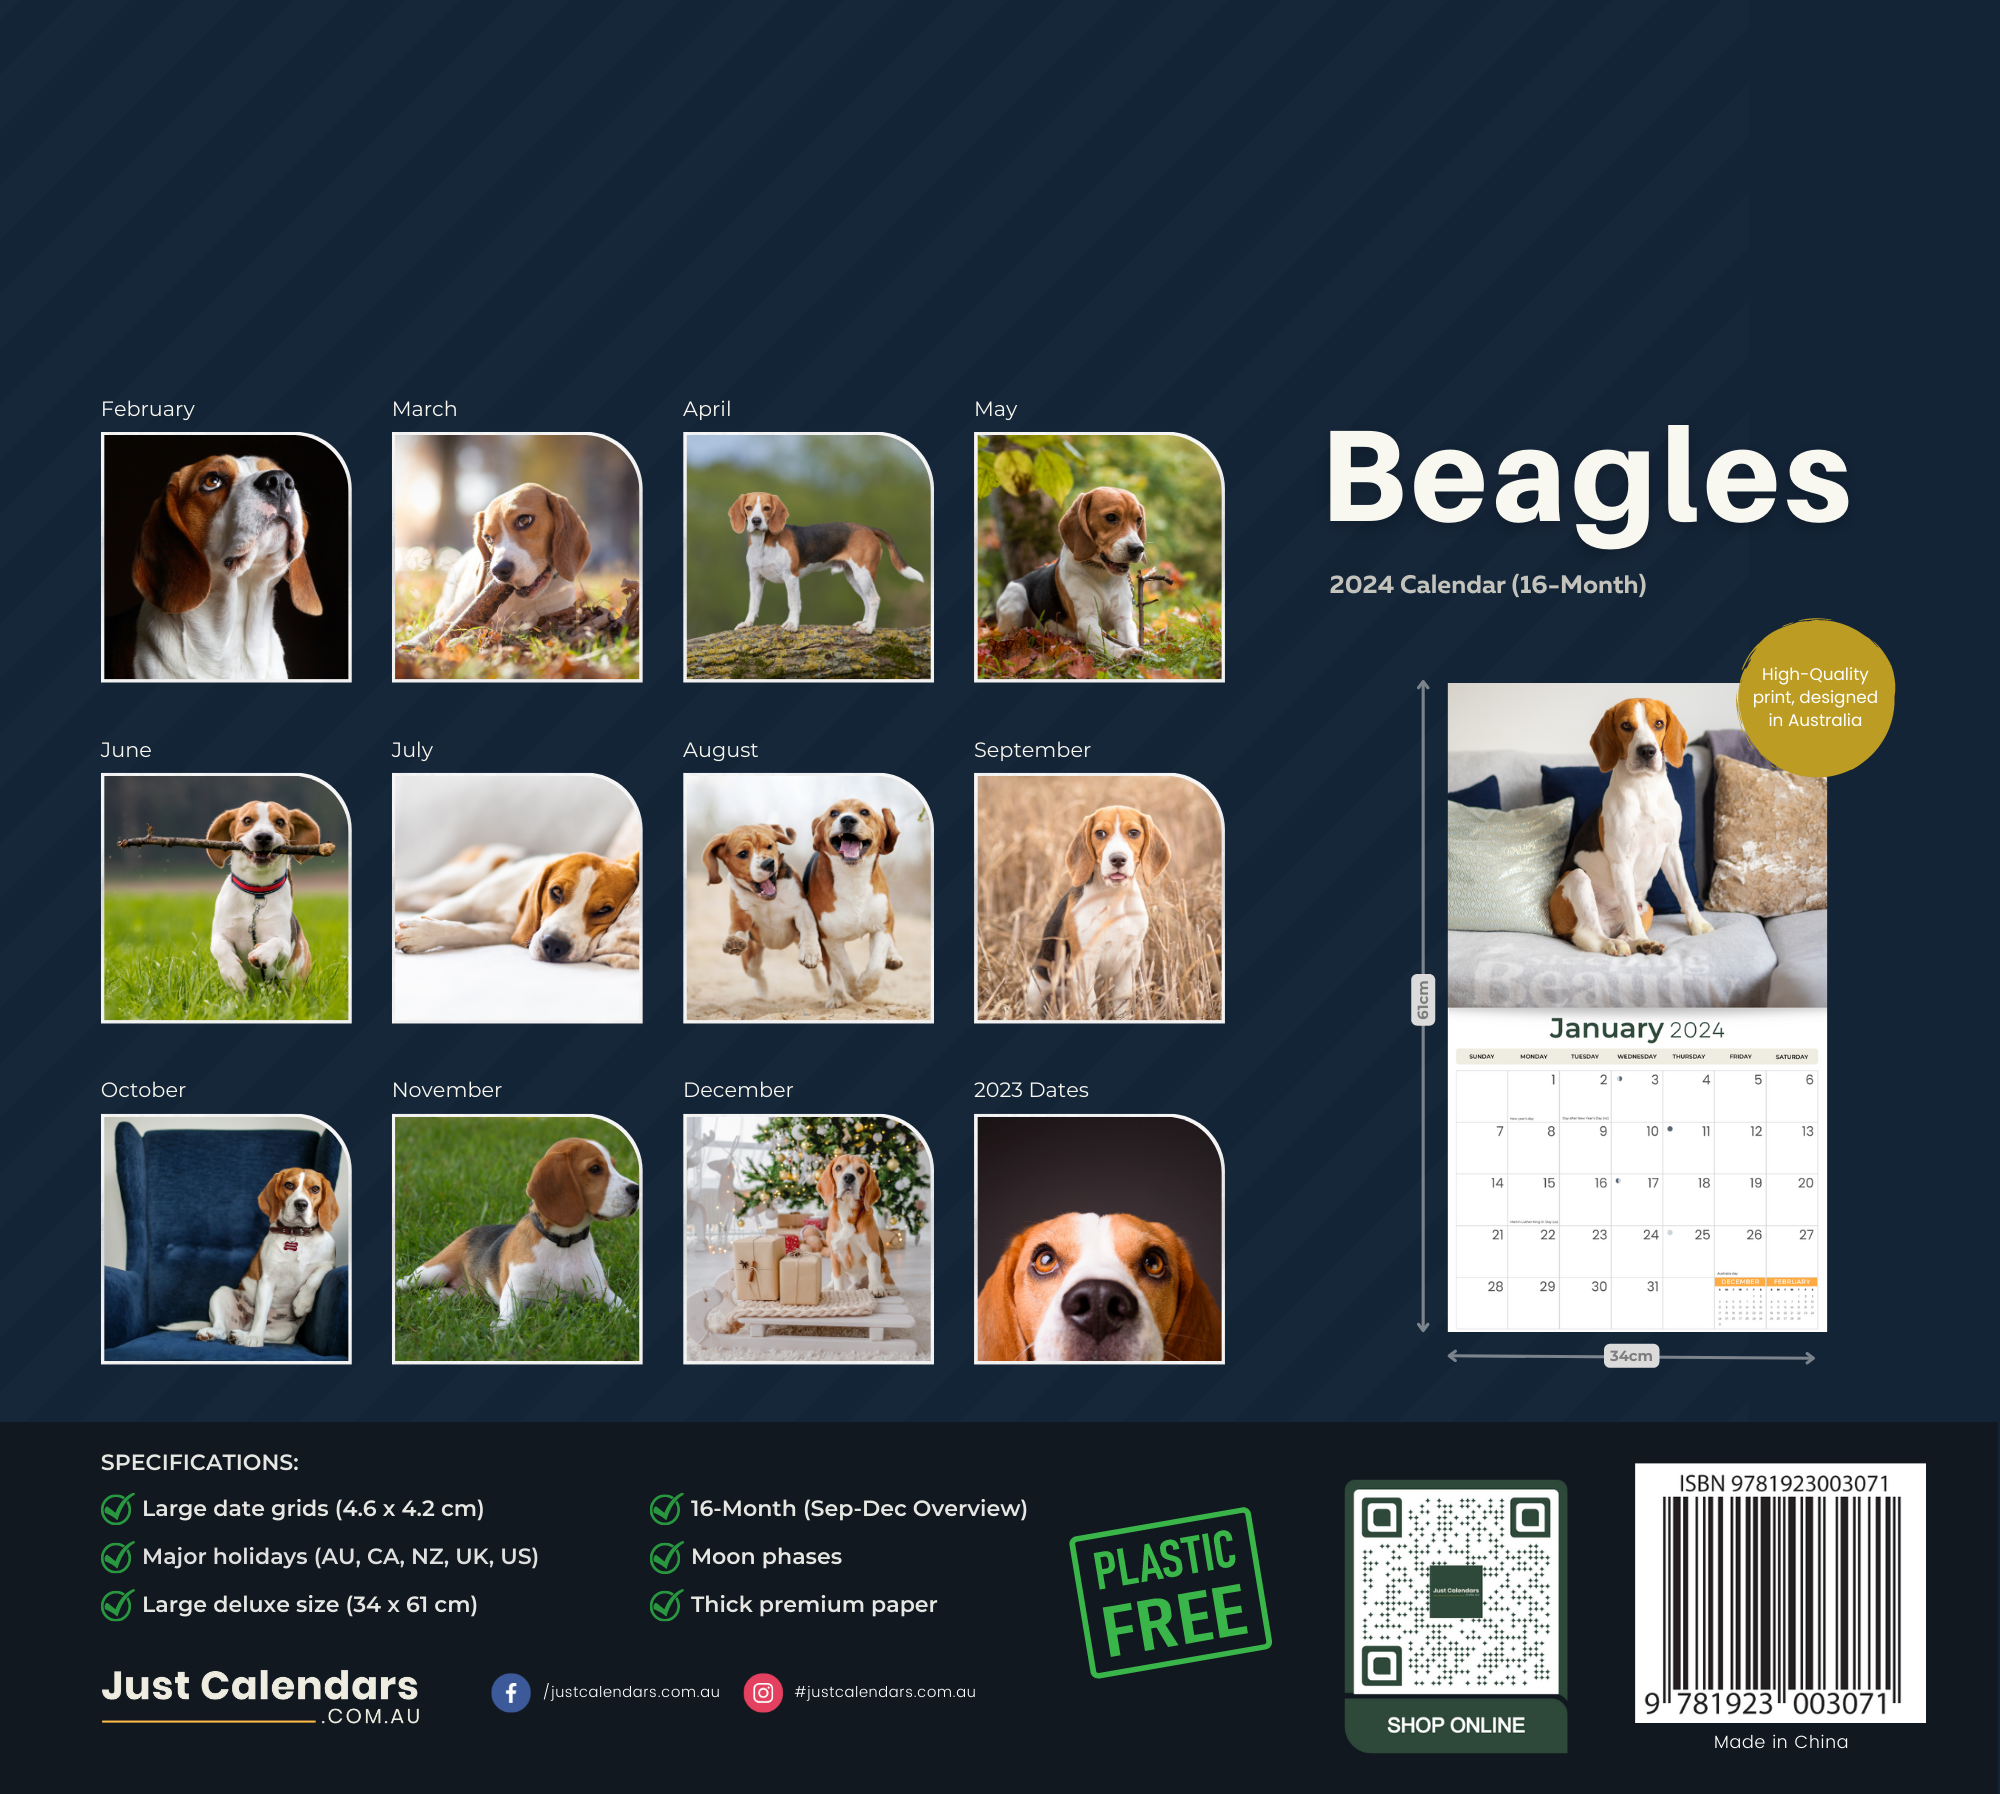 2024 Beagles Dogs & Puppies - Deluxe Wall Calendar by Just Calendars - 16 Month - Plastic Free